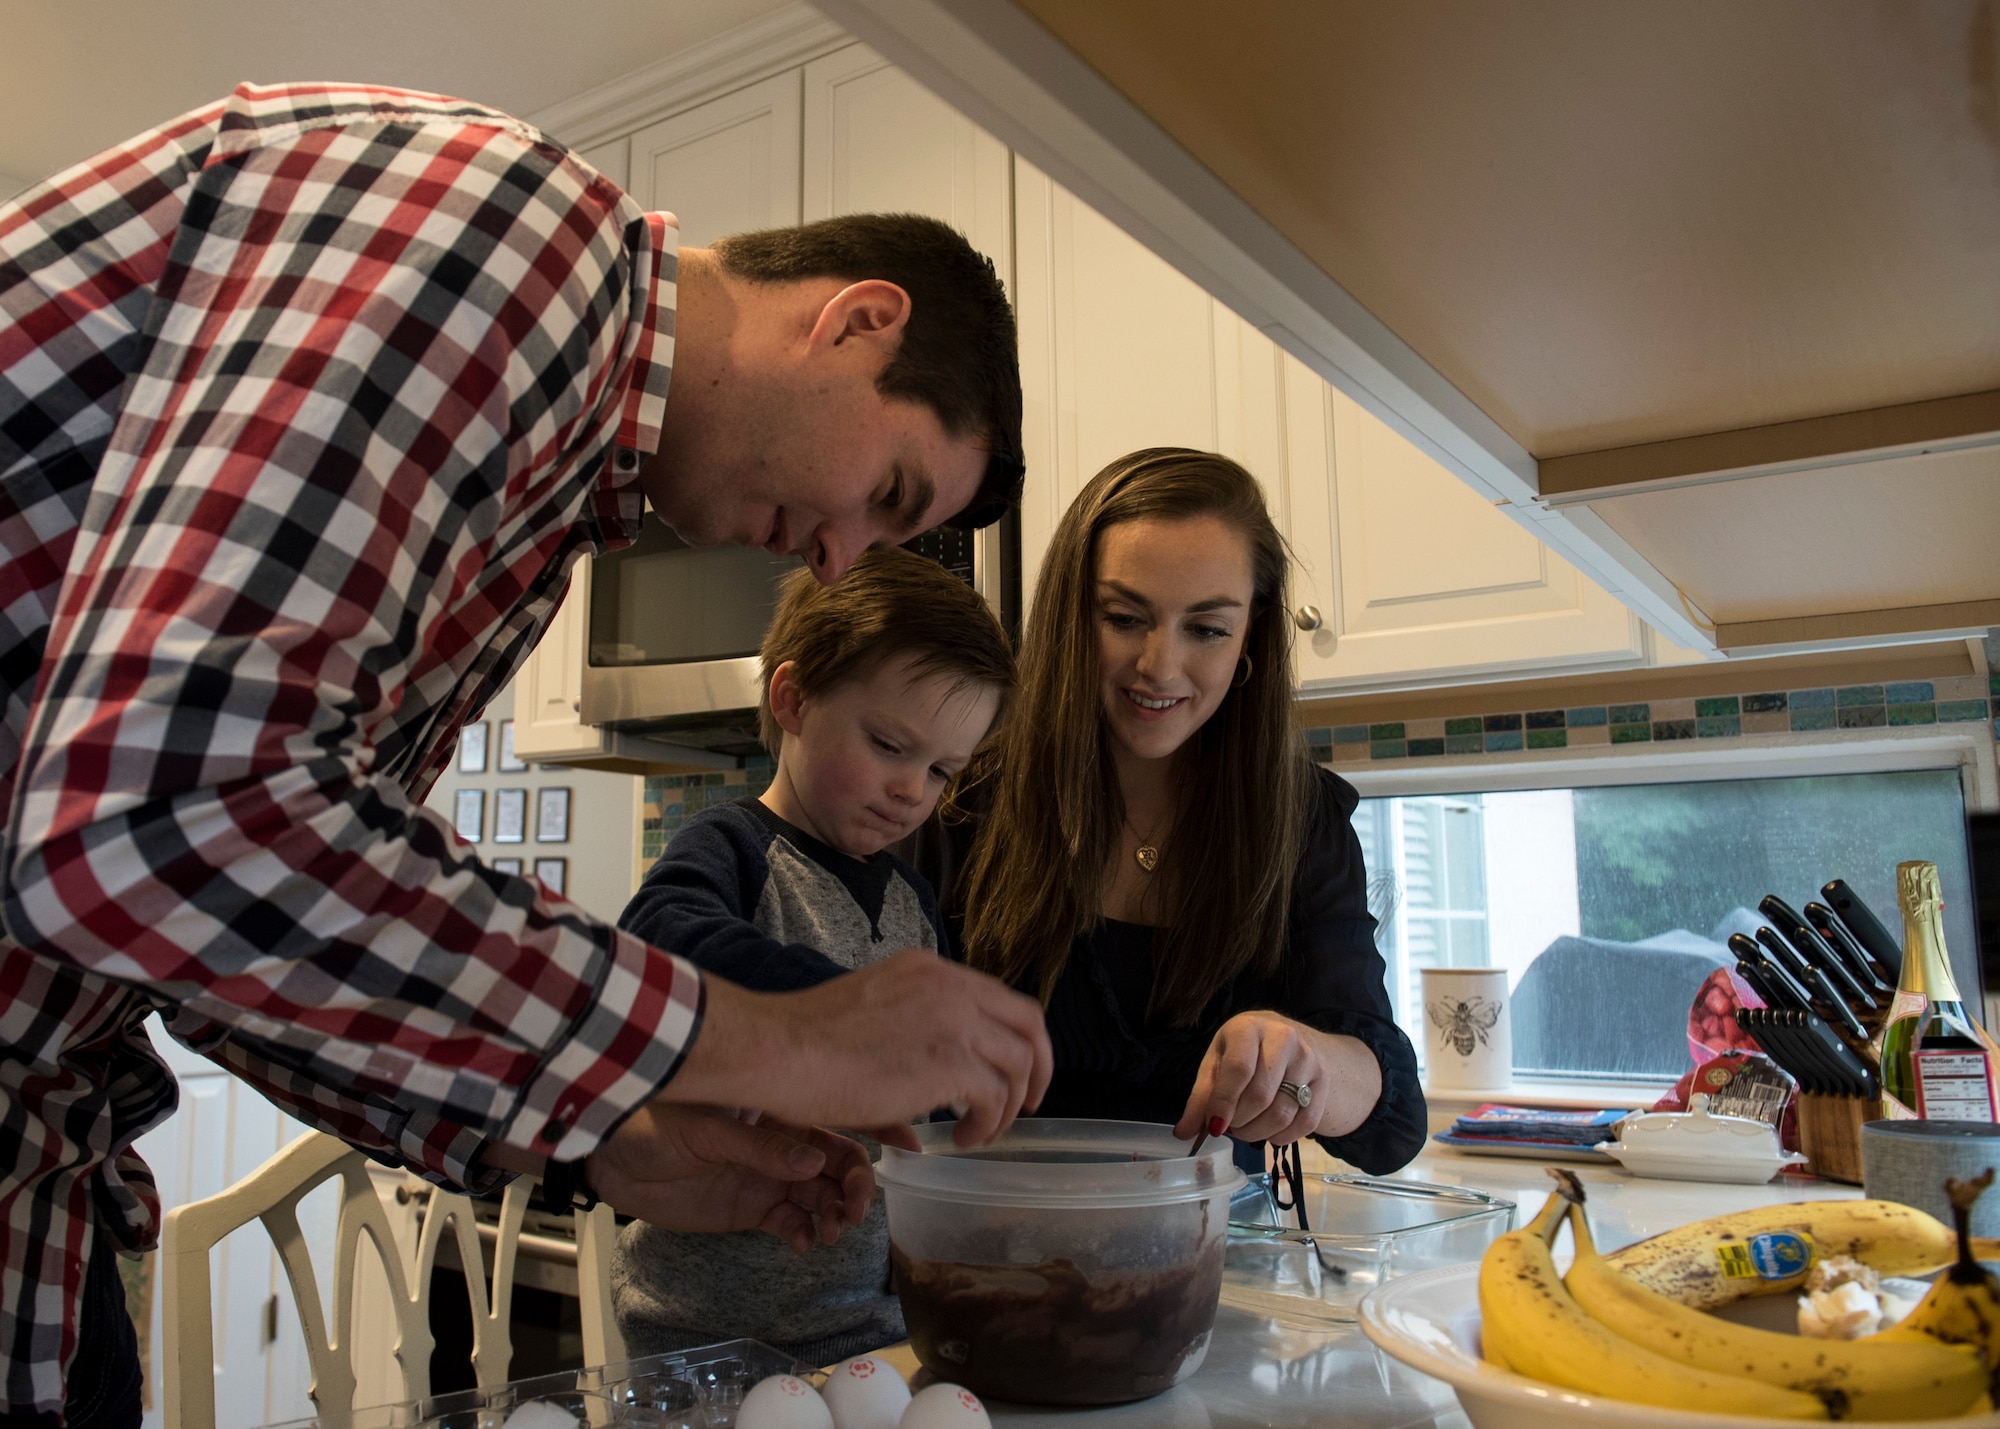 Capt. Steven Noller, 21st Airlift Squadron pilot, his spouse Morgan and their son Camden, prep a cake for baking in their home in Vacaville, California, Dec. 7, 2018. Morgan won the 2018 Joan Orr Air Force Spouse of the Year Award. (U.S. Air Force photo by Lan Kim)